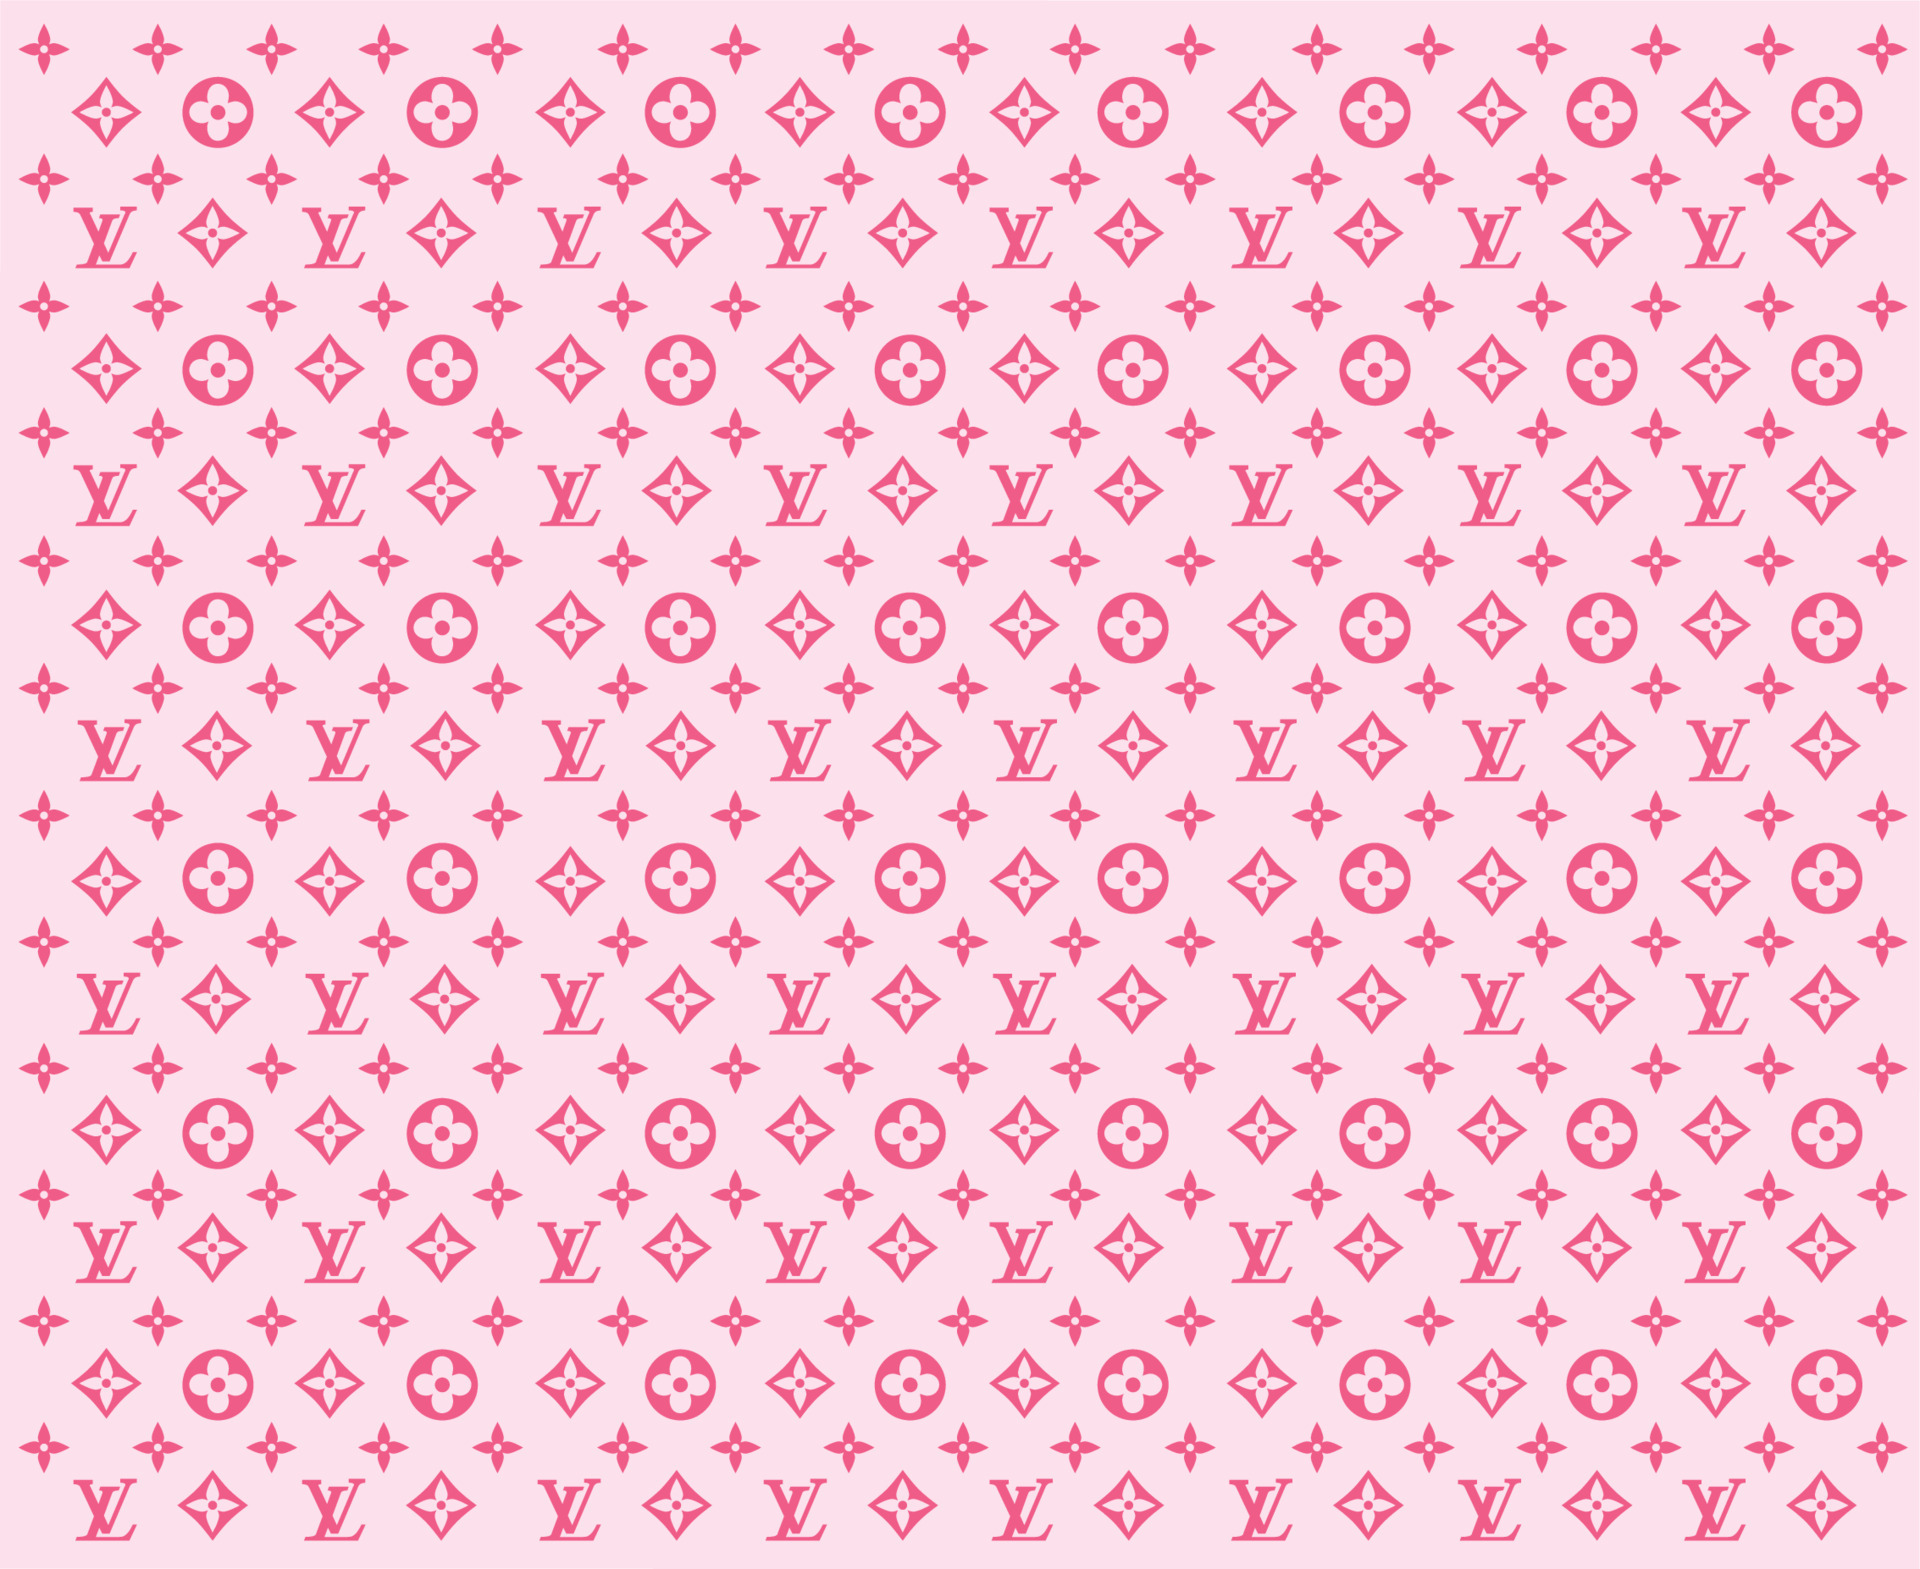 Louis Vuitton Brand Logo Background Pink And Black Symbol Design Clothes  Fashion Vector Illustration 23871170 Vector Art at Vecteezy